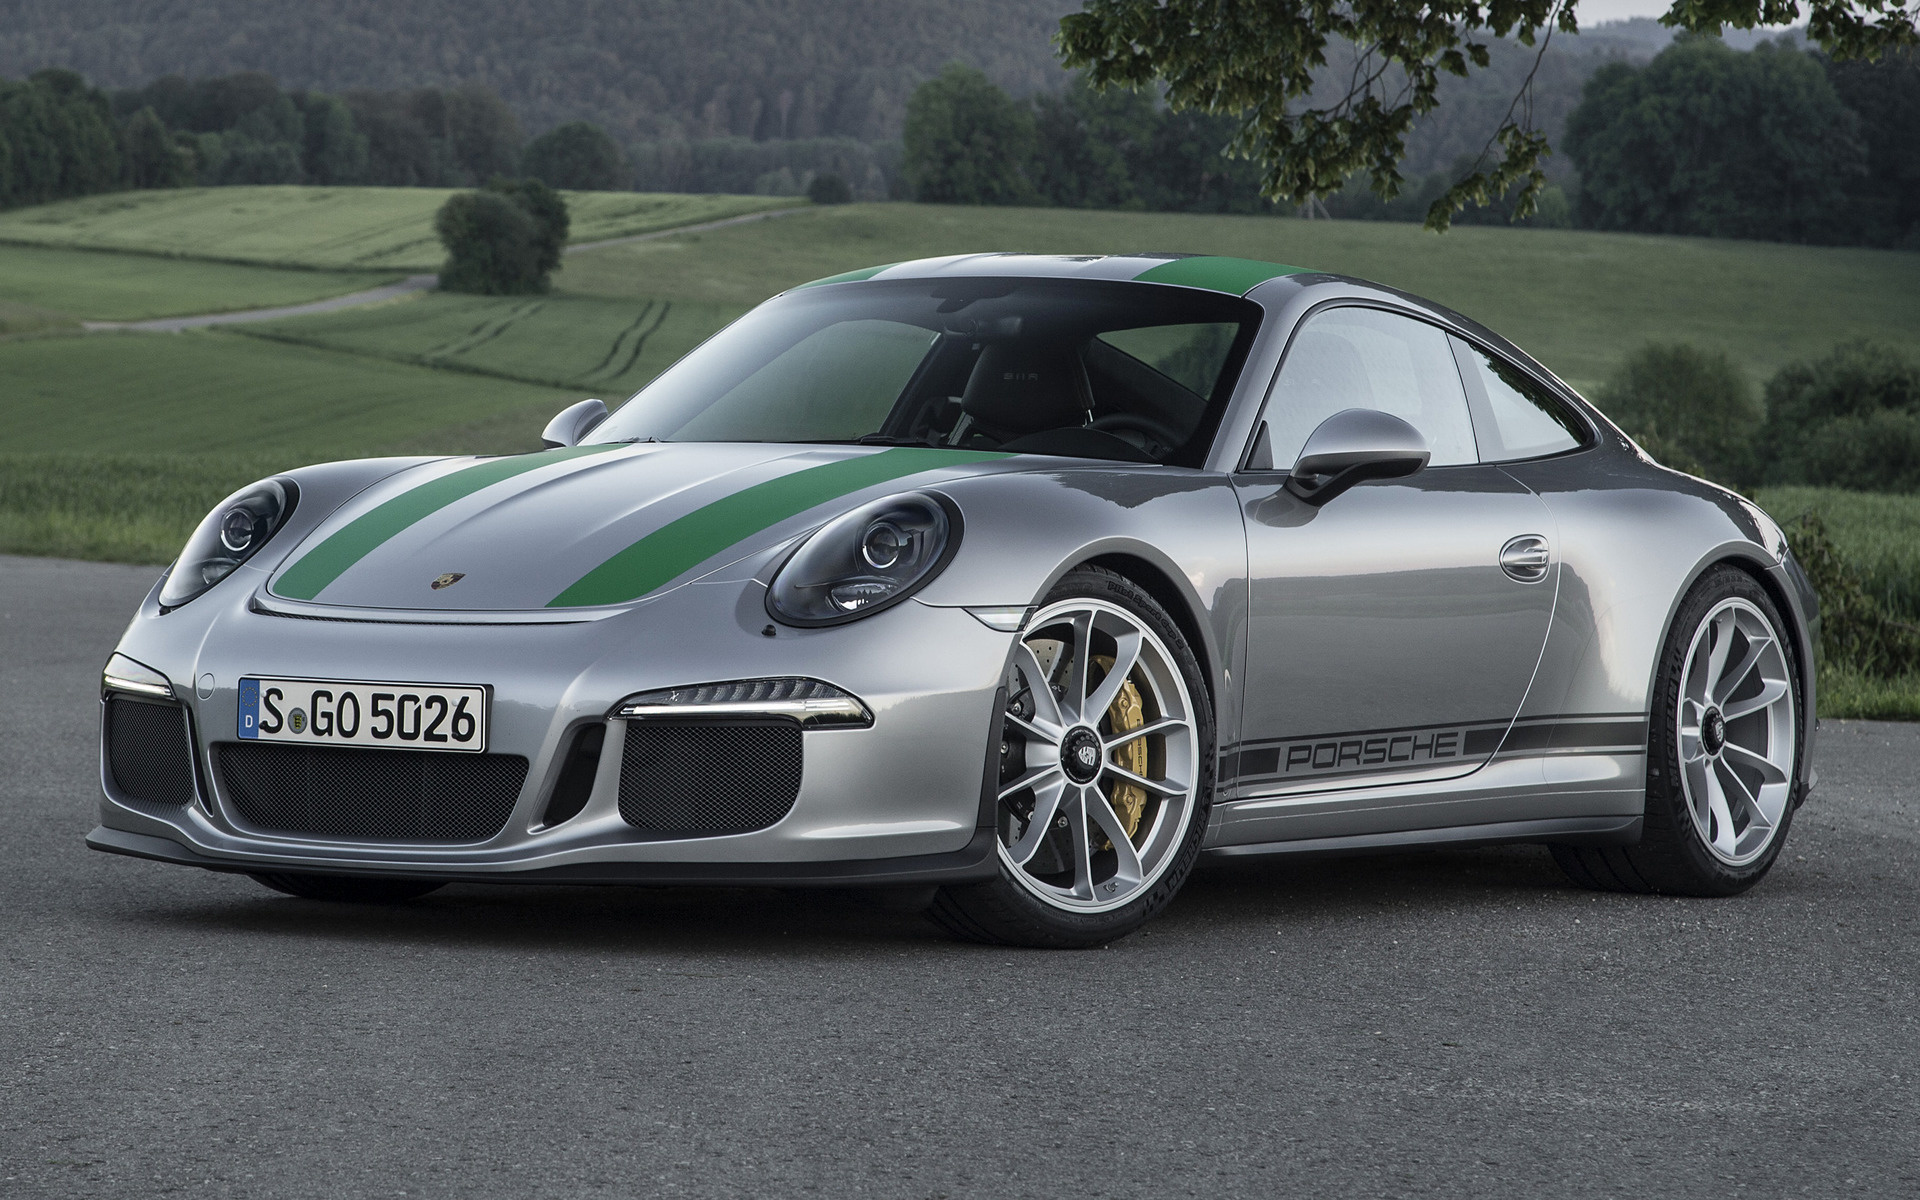 Porsche 911 R 2016 Wallpapers and HD Images   Car Pixel 1920x1200